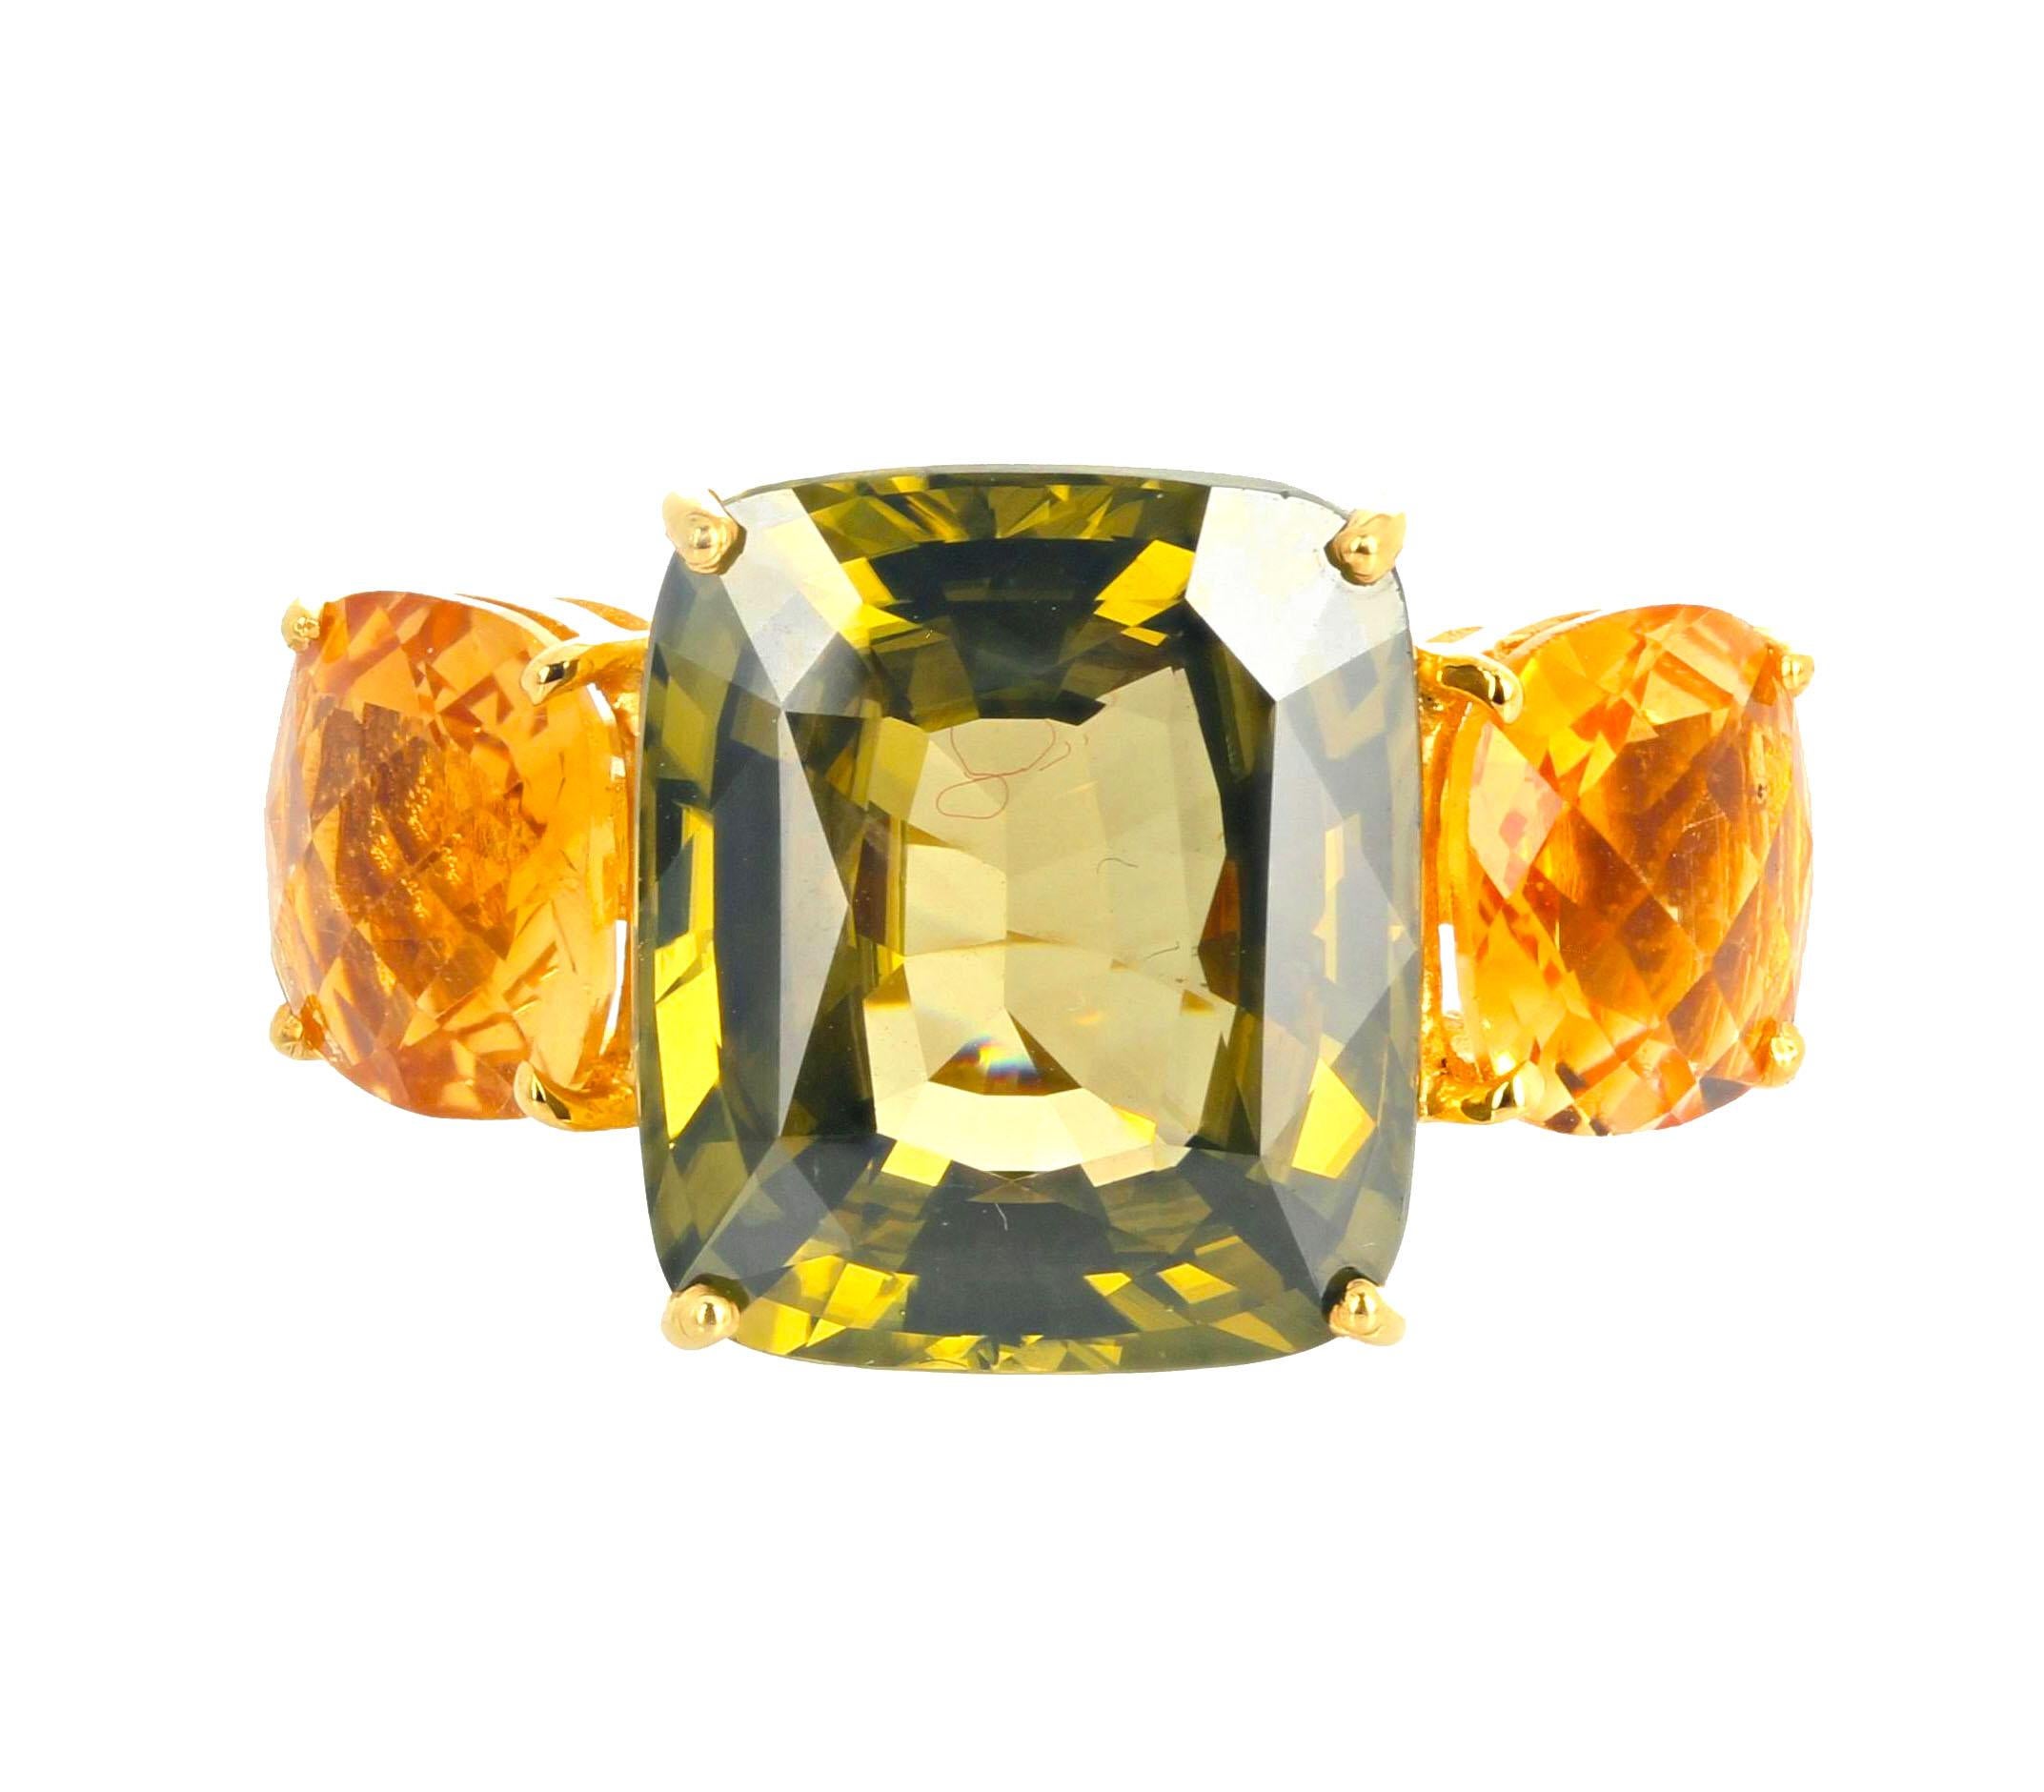 This dazzling natural real 22.68 carat center fiery natural cushion cut green Sri Lankan Zircon is flanked by 6.48 carats of very large brilliant checkerboard gemcut cushion cut Citrines.  This is sterling silver yellow gold plated size 7 (sizable